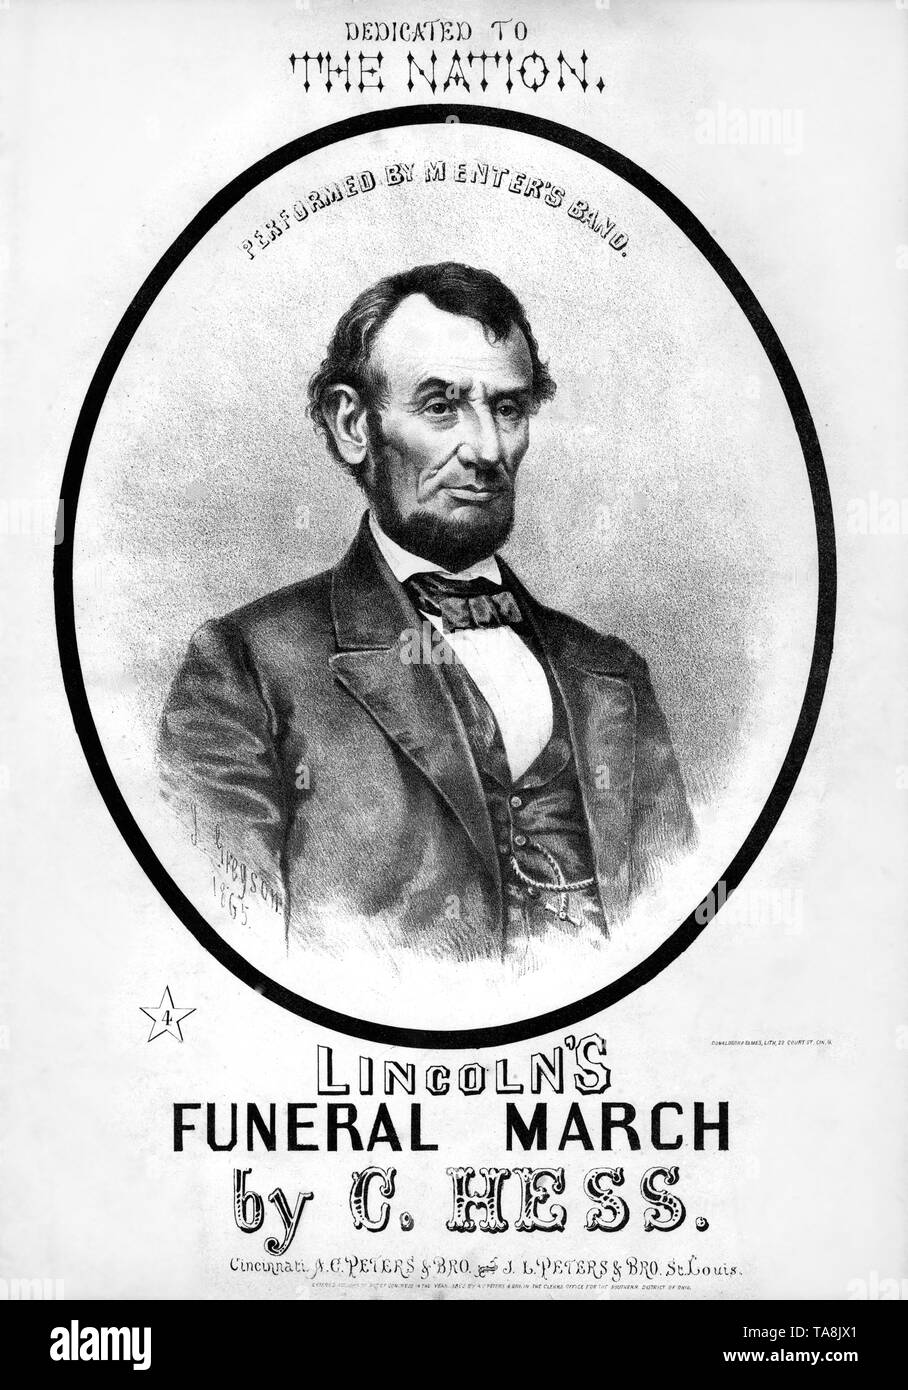 Lincoln's Funeral March by C. Hess, Performed by Menter's Band, Sheet Music, Artwork by J. Gregson, Published by A.C. Peters & Bro., 1865 Stock Photo